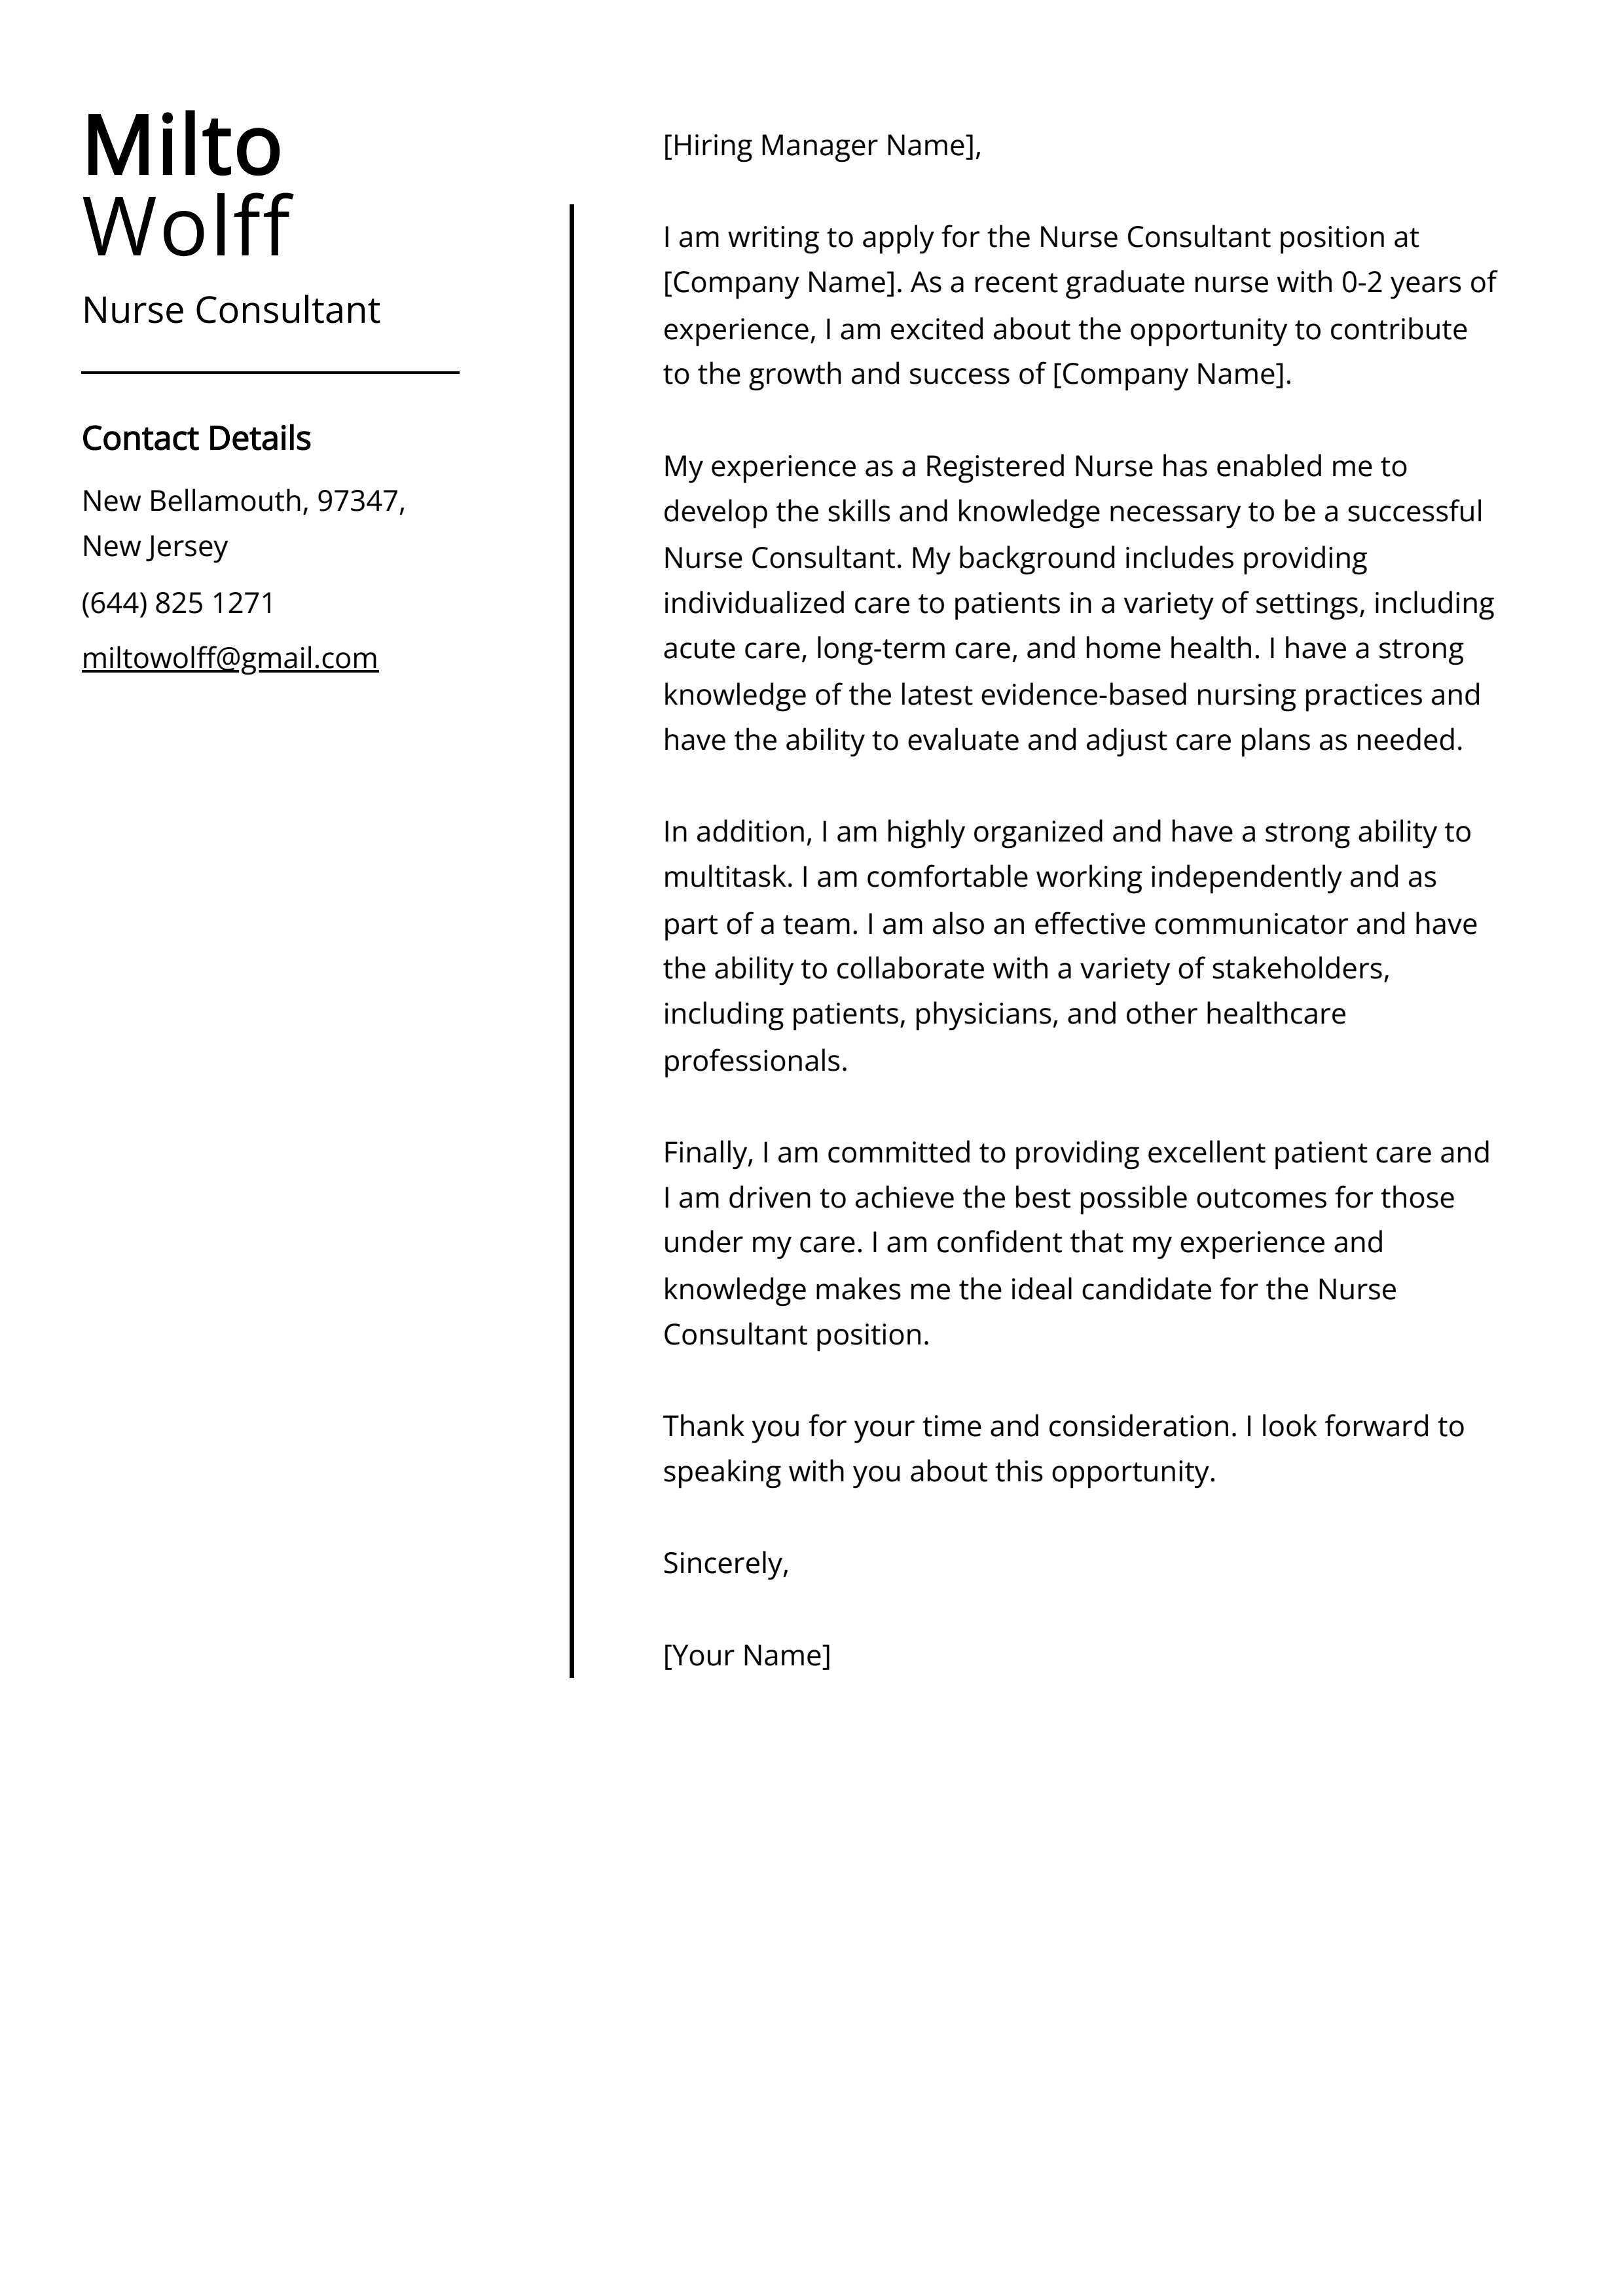 Nurse Consultant Cover Letter Example